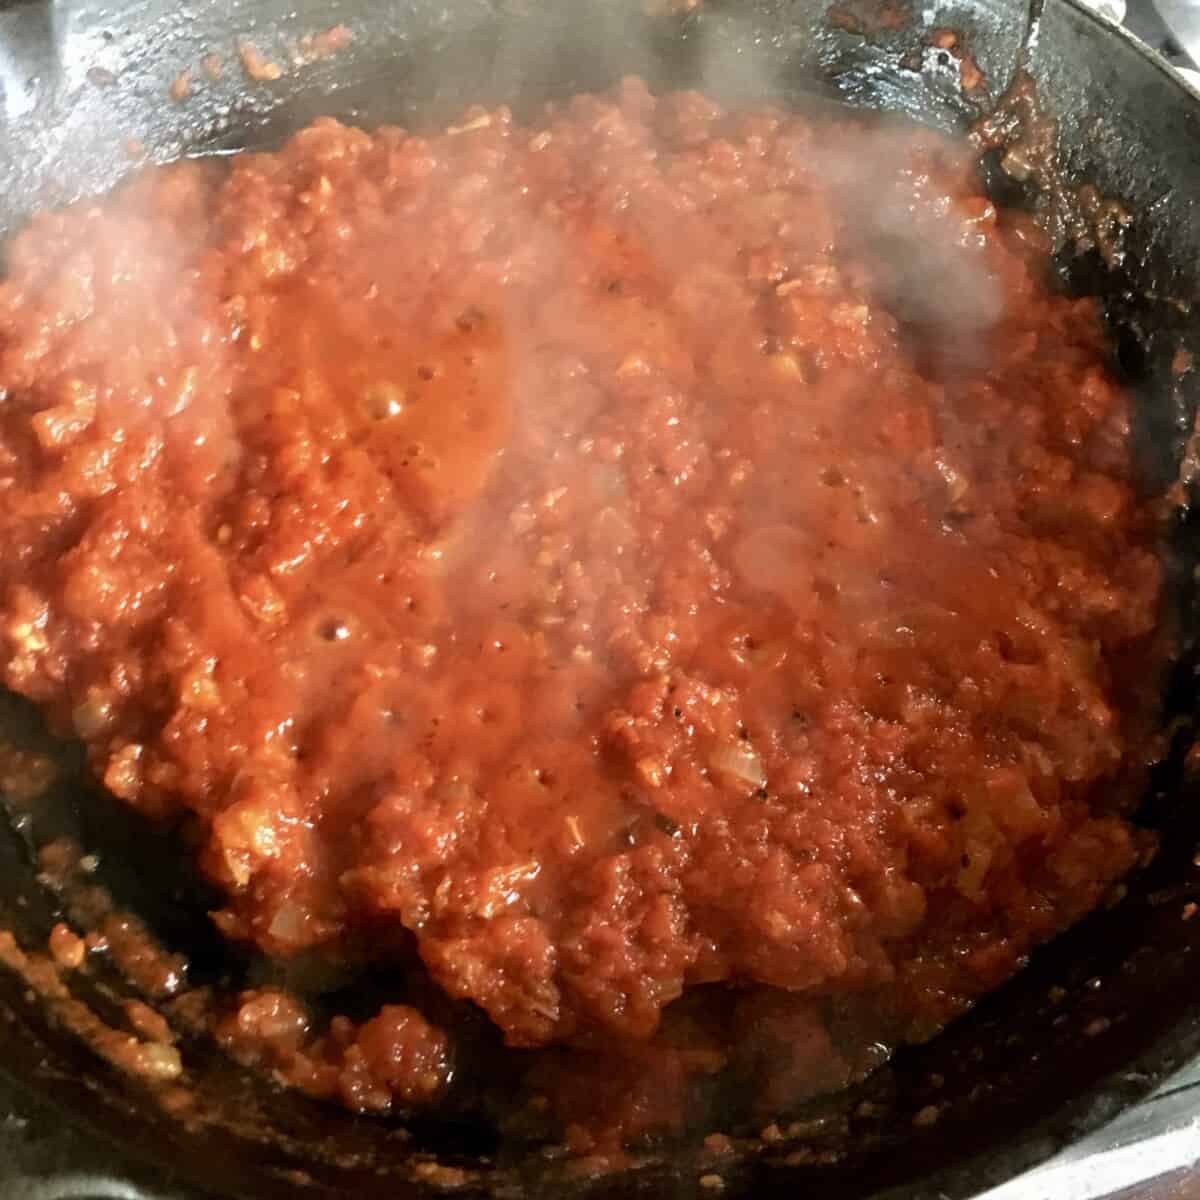 A skillet with pasta sauce in it being cooked to reduce it to pizza sauce consistency.